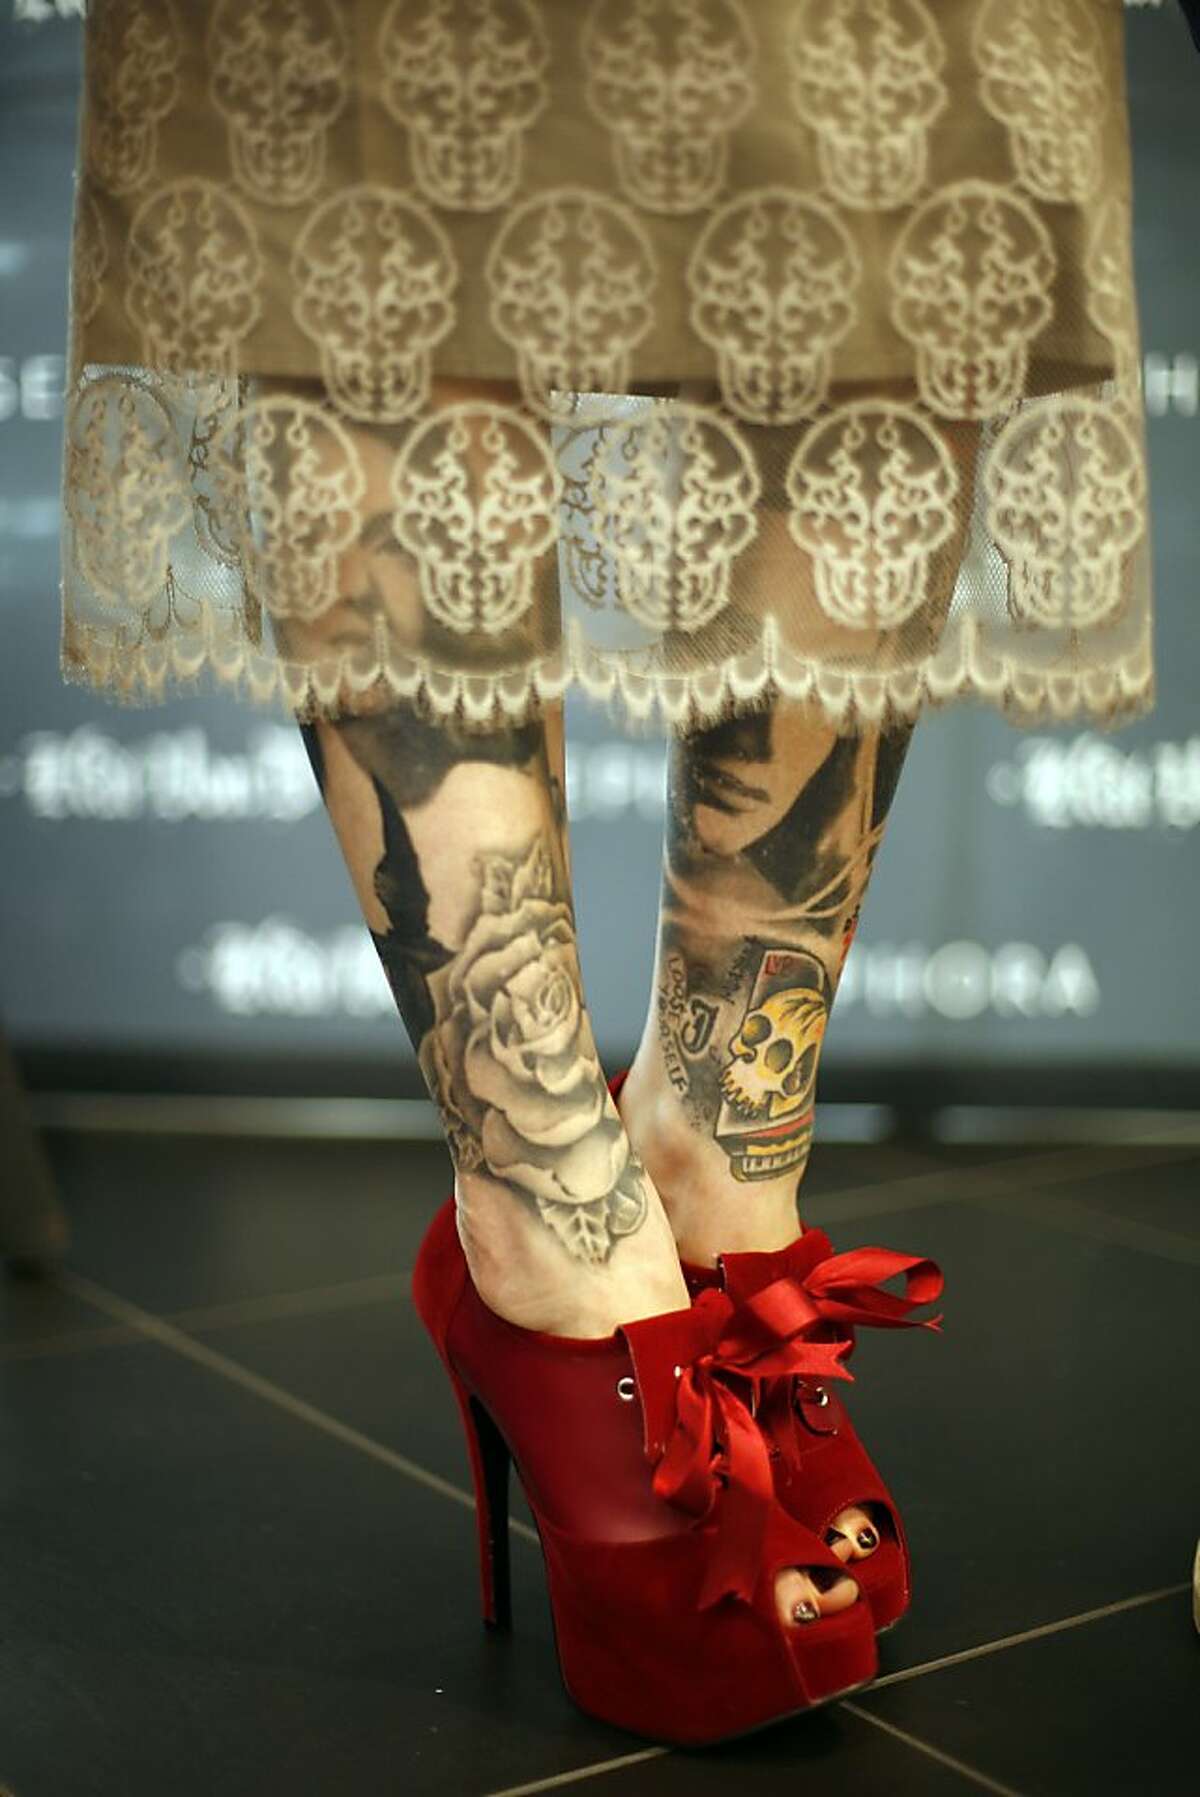 Kat Von D shows off her tatooed legs at a show of here artwork in Portland, Ore. (Photo by Jackie Butler/Getty Images for Sephora)